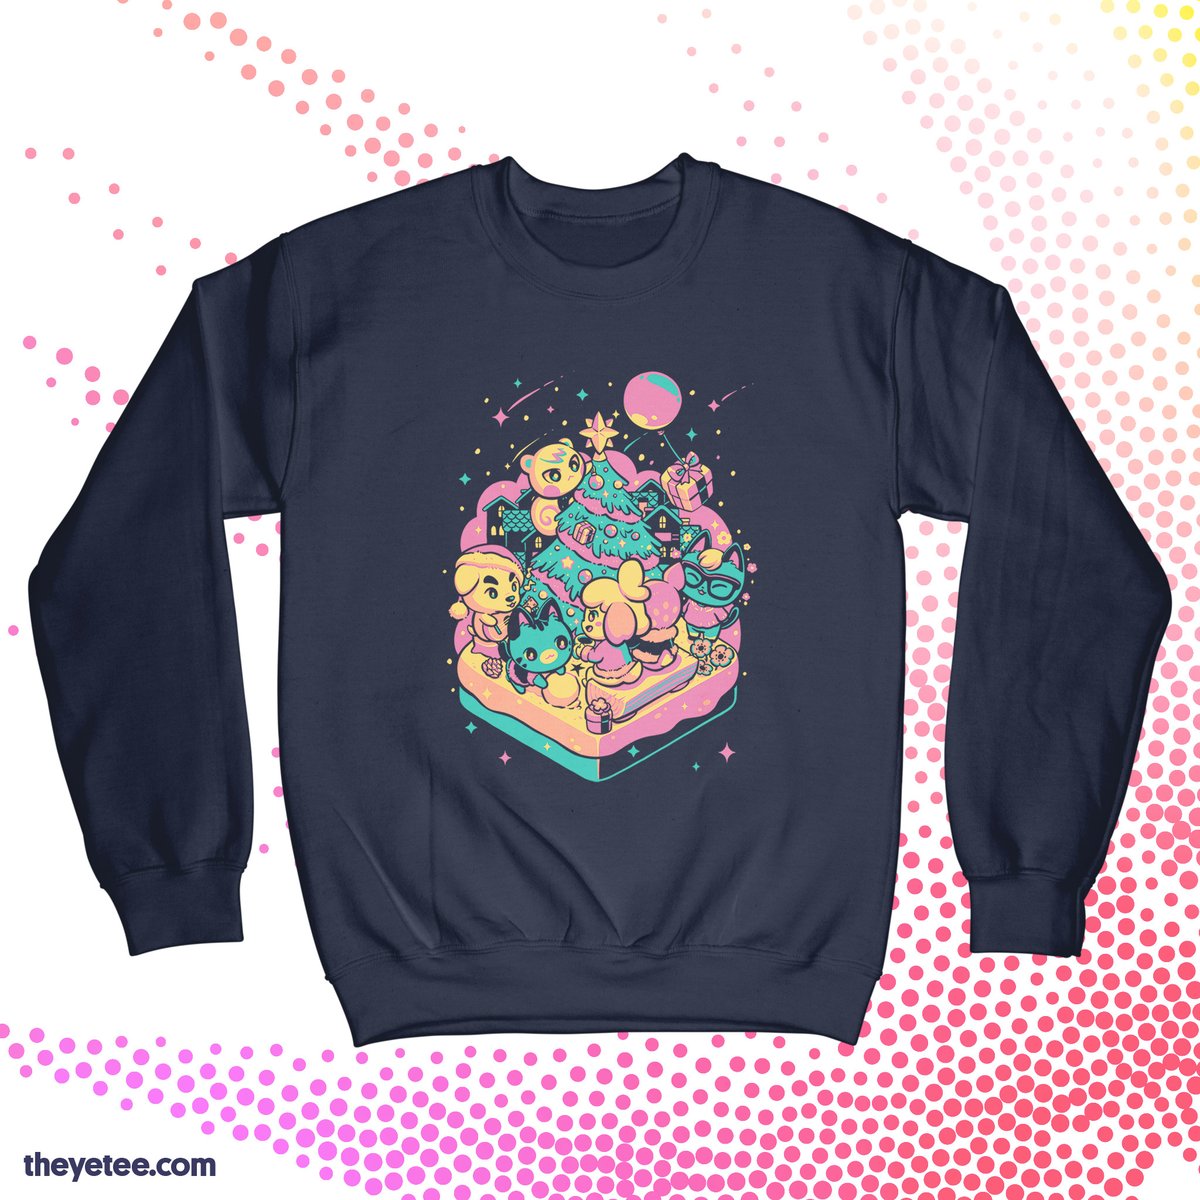 「Something about this season really bring」|The Yetee 🌈のイラスト